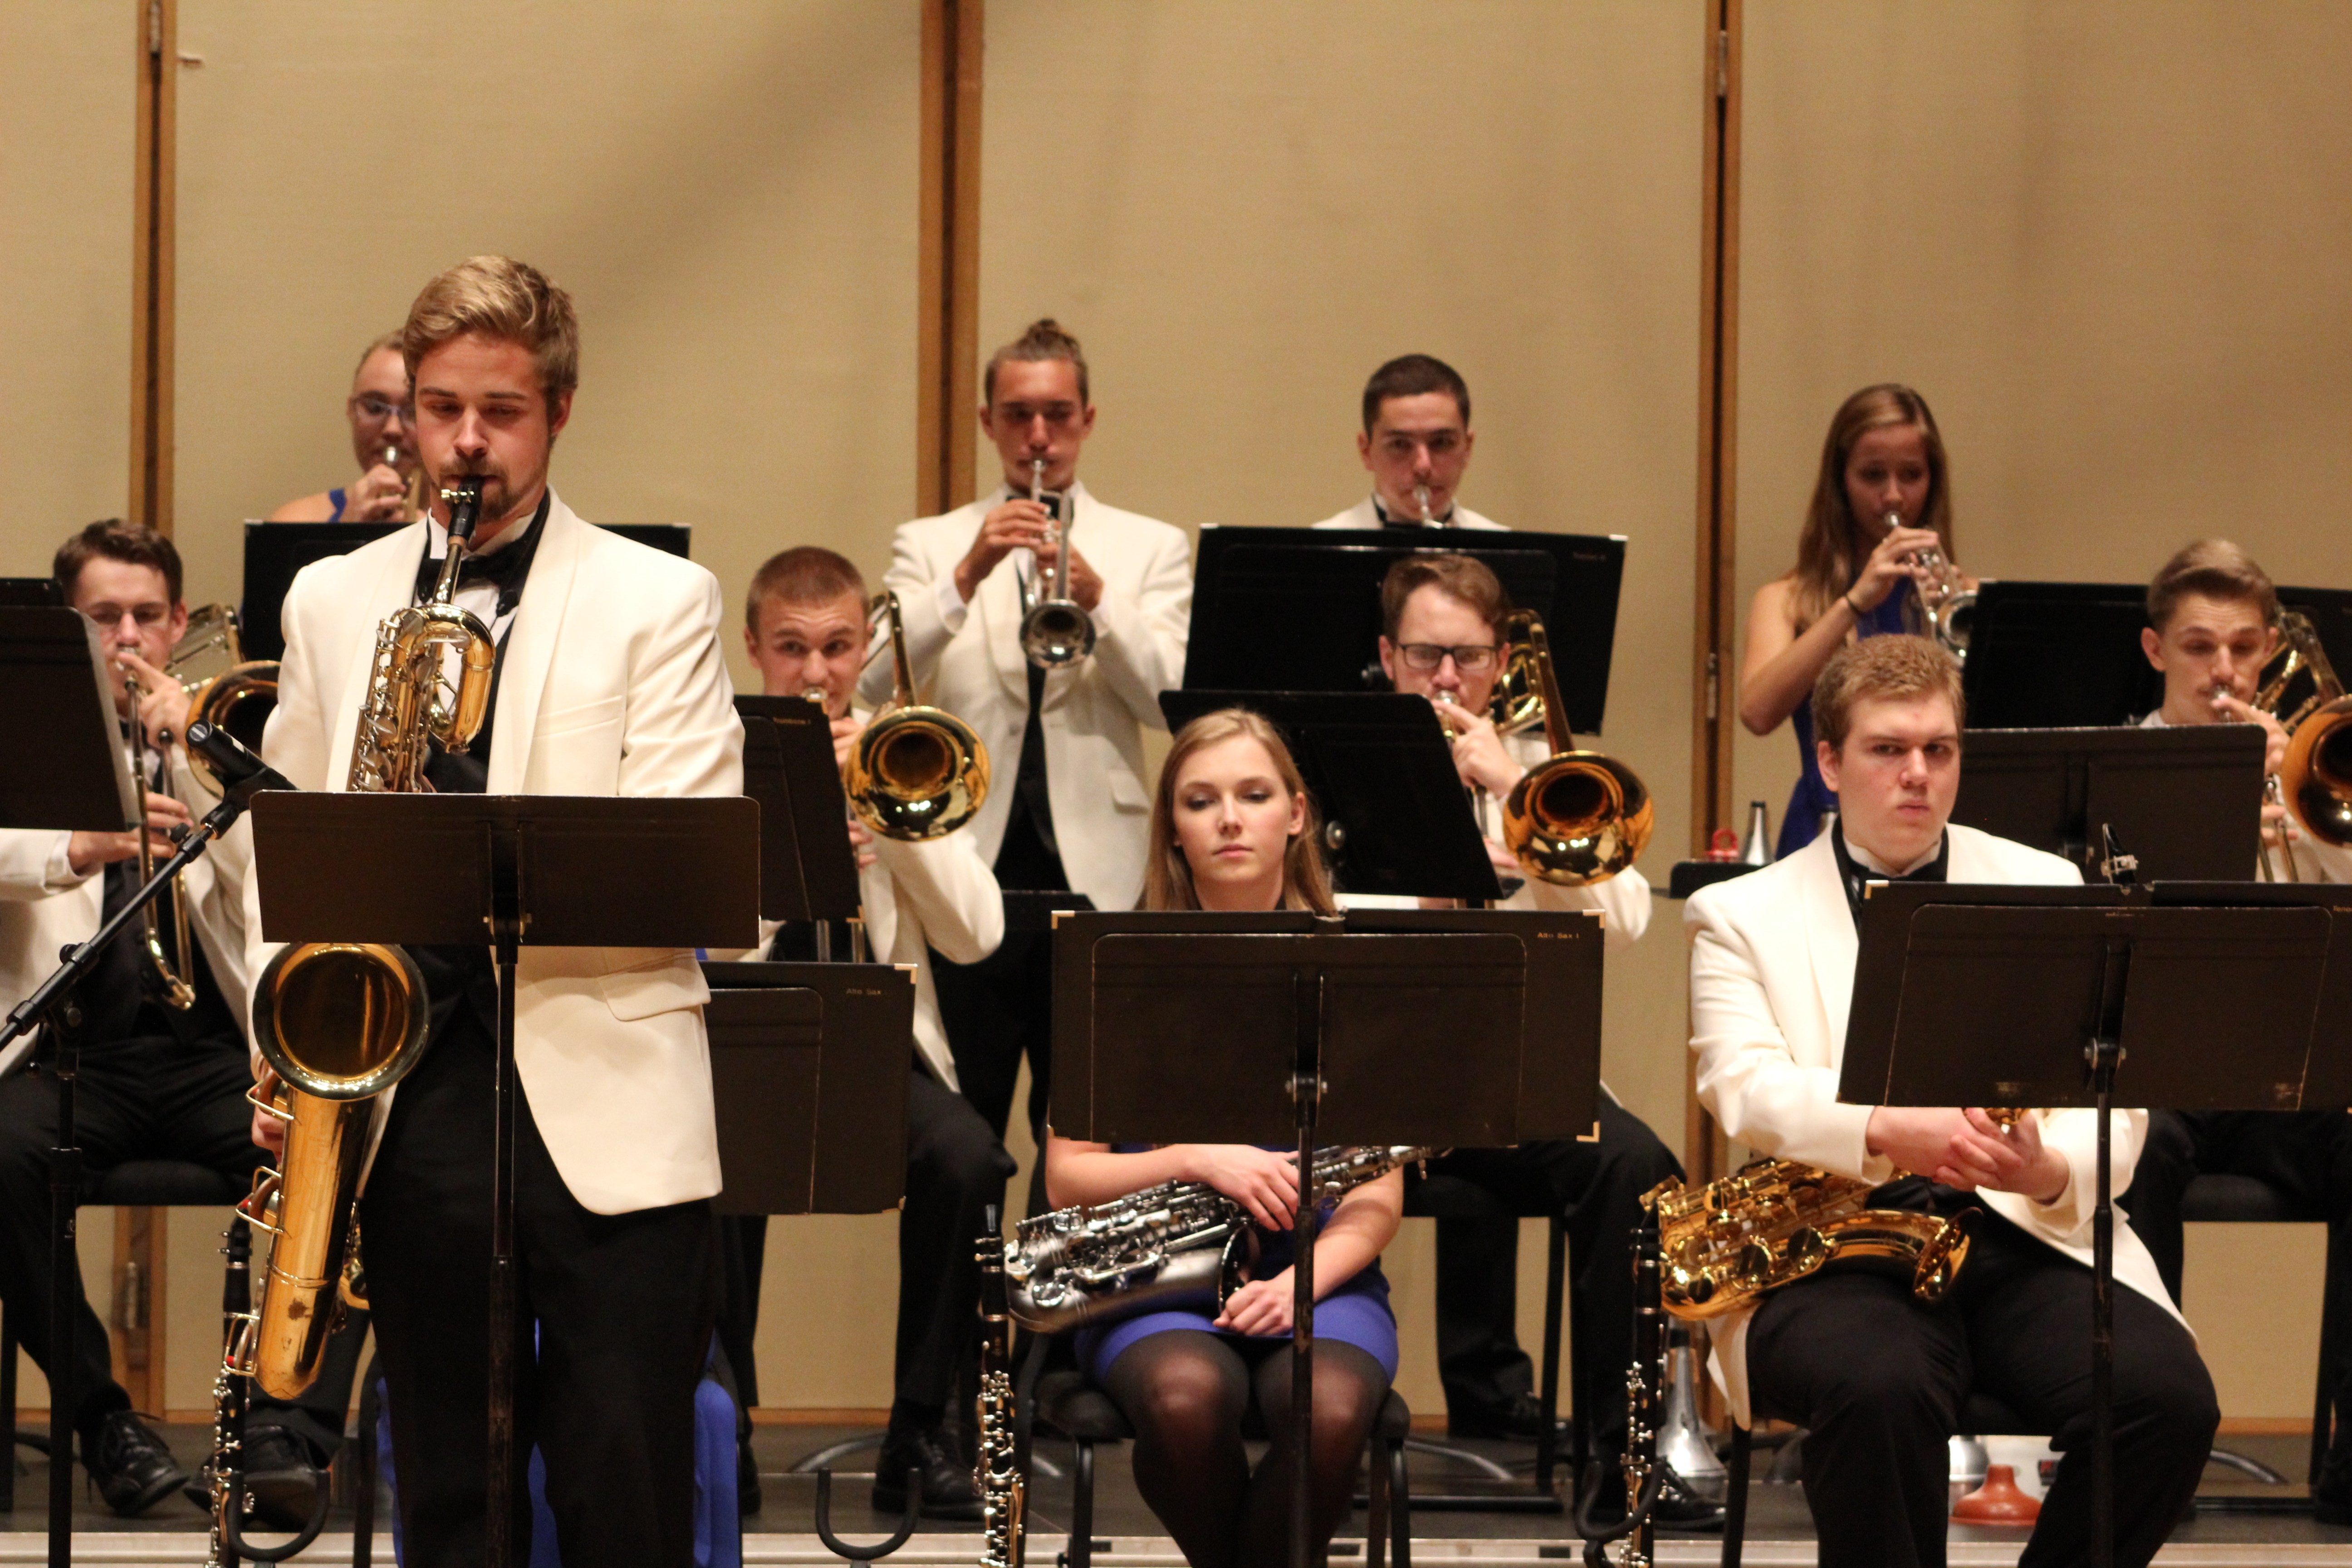 The Luther College Jazz Orchestra performs “Sophisticated Lady” with soloist David Blackstad on bari sax